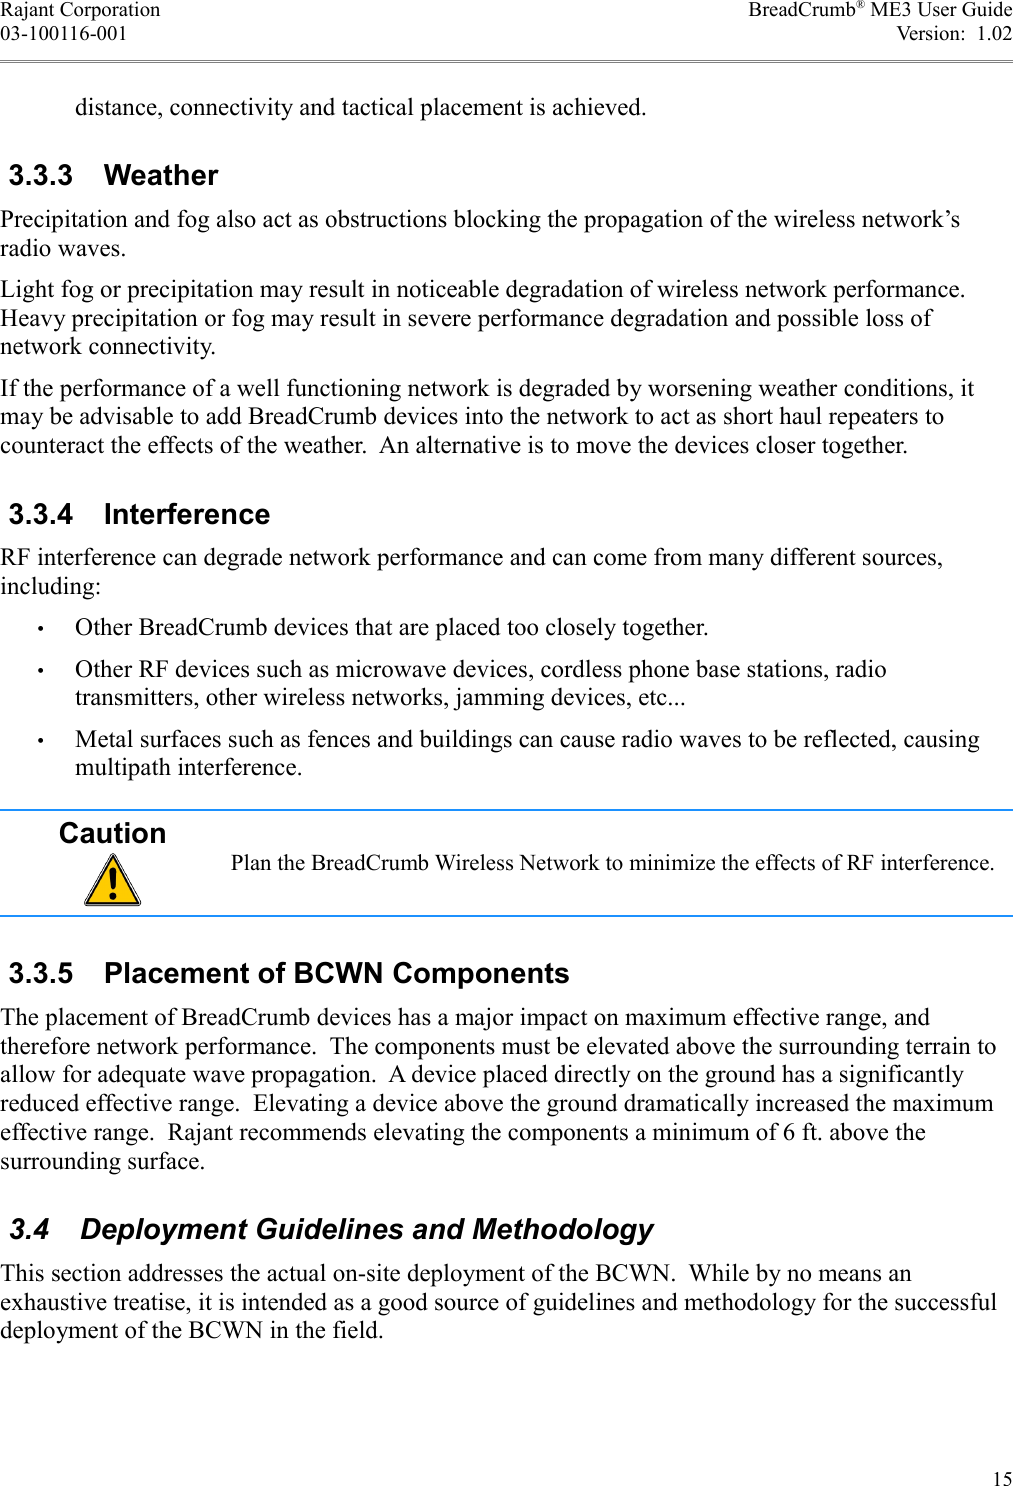 Rajant Corporation BreadCrumb® ME3 User Guide03-100116-001 Version:  1.02distance, connectivity and tactical placement is achieved. 3.3.3  WeatherPrecipitation and fog also act as obstructions blocking the propagation of the wireless network’s radio waves.Light fog or precipitation may result in noticeable degradation of wireless network performance. Heavy precipitation or fog may result in severe performance degradation and possible loss of network connectivity.If the performance of a well functioning network is degraded by worsening weather conditions, it may be advisable to add BreadCrumb devices into the network to act as short haul repeaters to counteract the effects of the weather.  An alternative is to move the devices closer together. 3.3.4  InterferenceRF interference can degrade network performance and can come from many different sources, including:•Other BreadCrumb devices that are placed too closely together.•Other RF devices such as microwave devices, cordless phone base stations, radio transmitters, other wireless networks, jamming devices, etc...•Metal surfaces such as fences and buildings can cause radio waves to be reflected, causing multipath interference.CautionPlan the BreadCrumb Wireless Network to minimize the effects of RF interference. 3.3.5  Placement of BCWN ComponentsThe placement of BreadCrumb devices has a major impact on maximum effective range, and therefore network performance.  The components must be elevated above the surrounding terrain to allow for adequate wave propagation.  A device placed directly on the ground has a significantly reduced effective range.  Elevating a device above the ground dramatically increased the maximum effective range.  Rajant recommends elevating the components a minimum of 6 ft. above the surrounding surface. 3.4  Deployment Guidelines and MethodologyThis section addresses the actual on-site deployment of the BCWN.  While by no means an exhaustive treatise, it is intended as a good source of guidelines and methodology for the successful deployment of the BCWN in the field.15